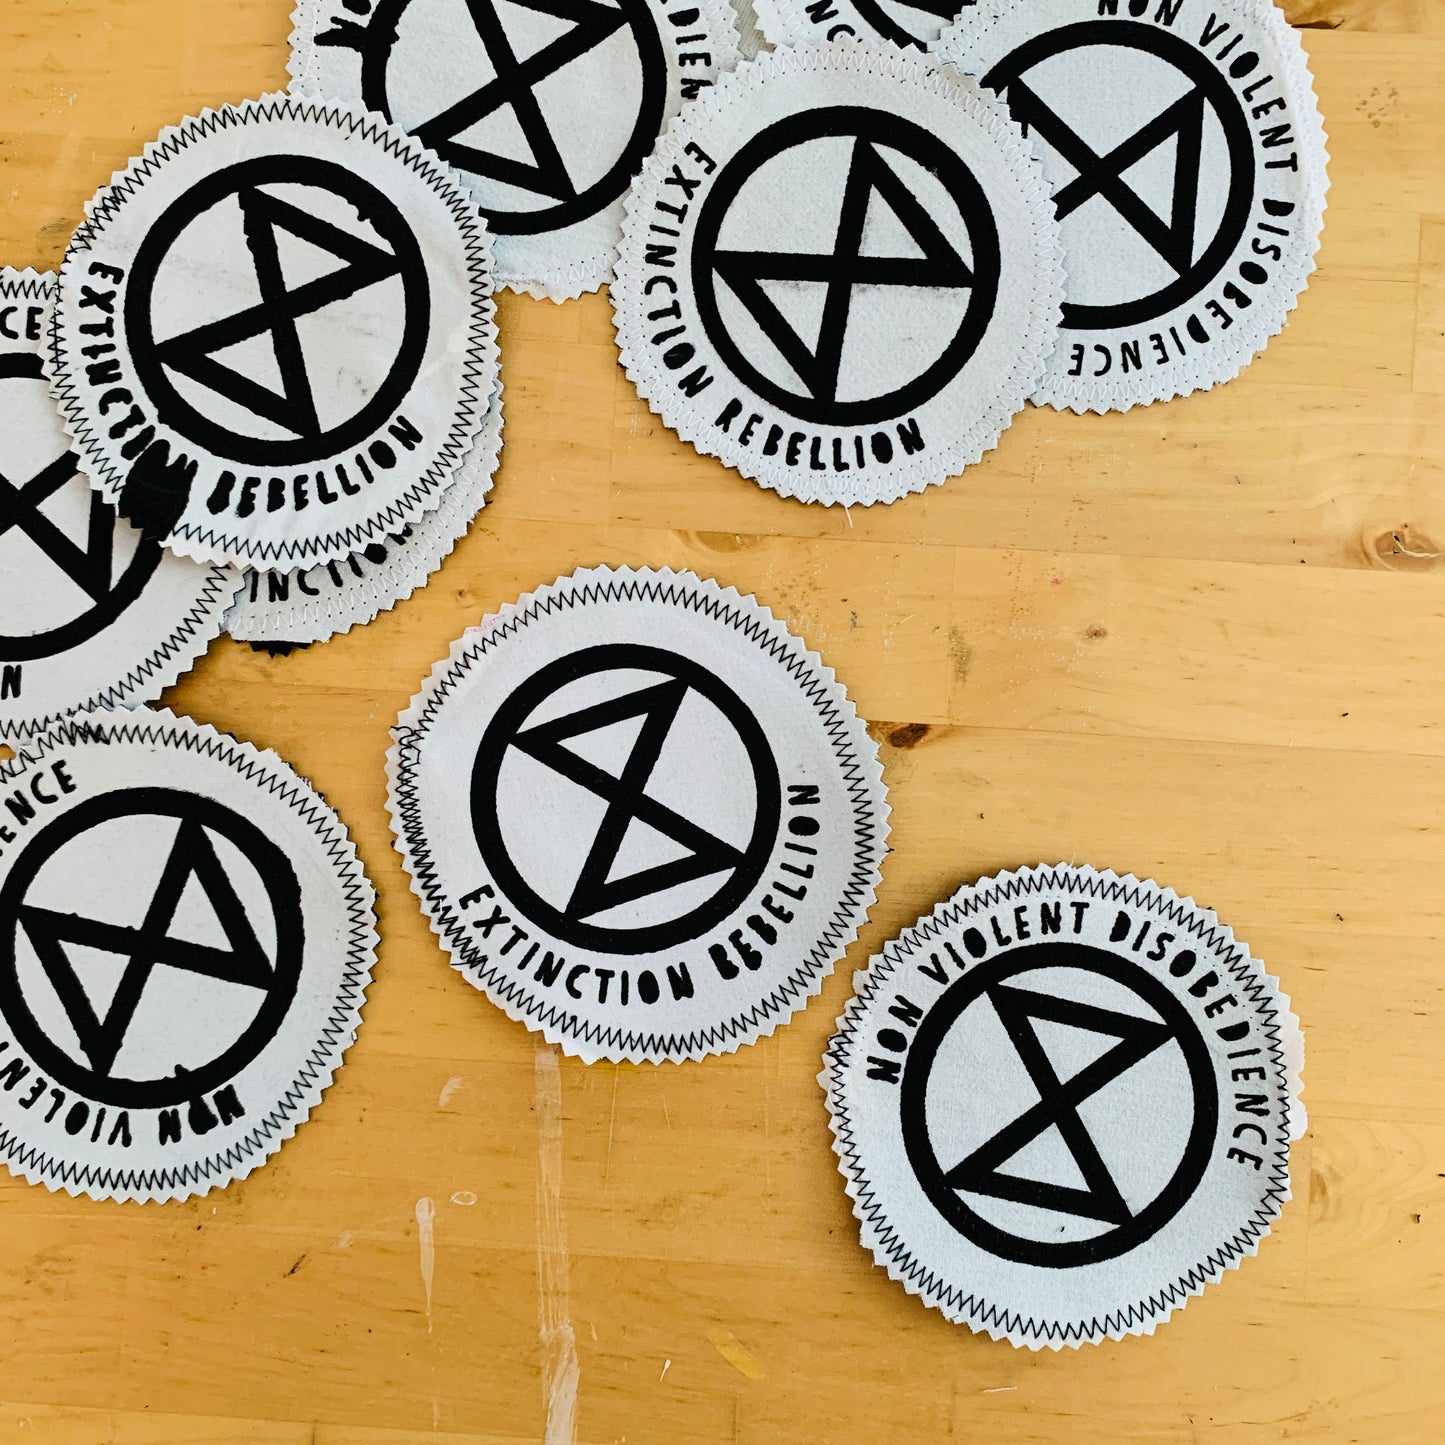 EXTINCTION REBELLION sew on patches